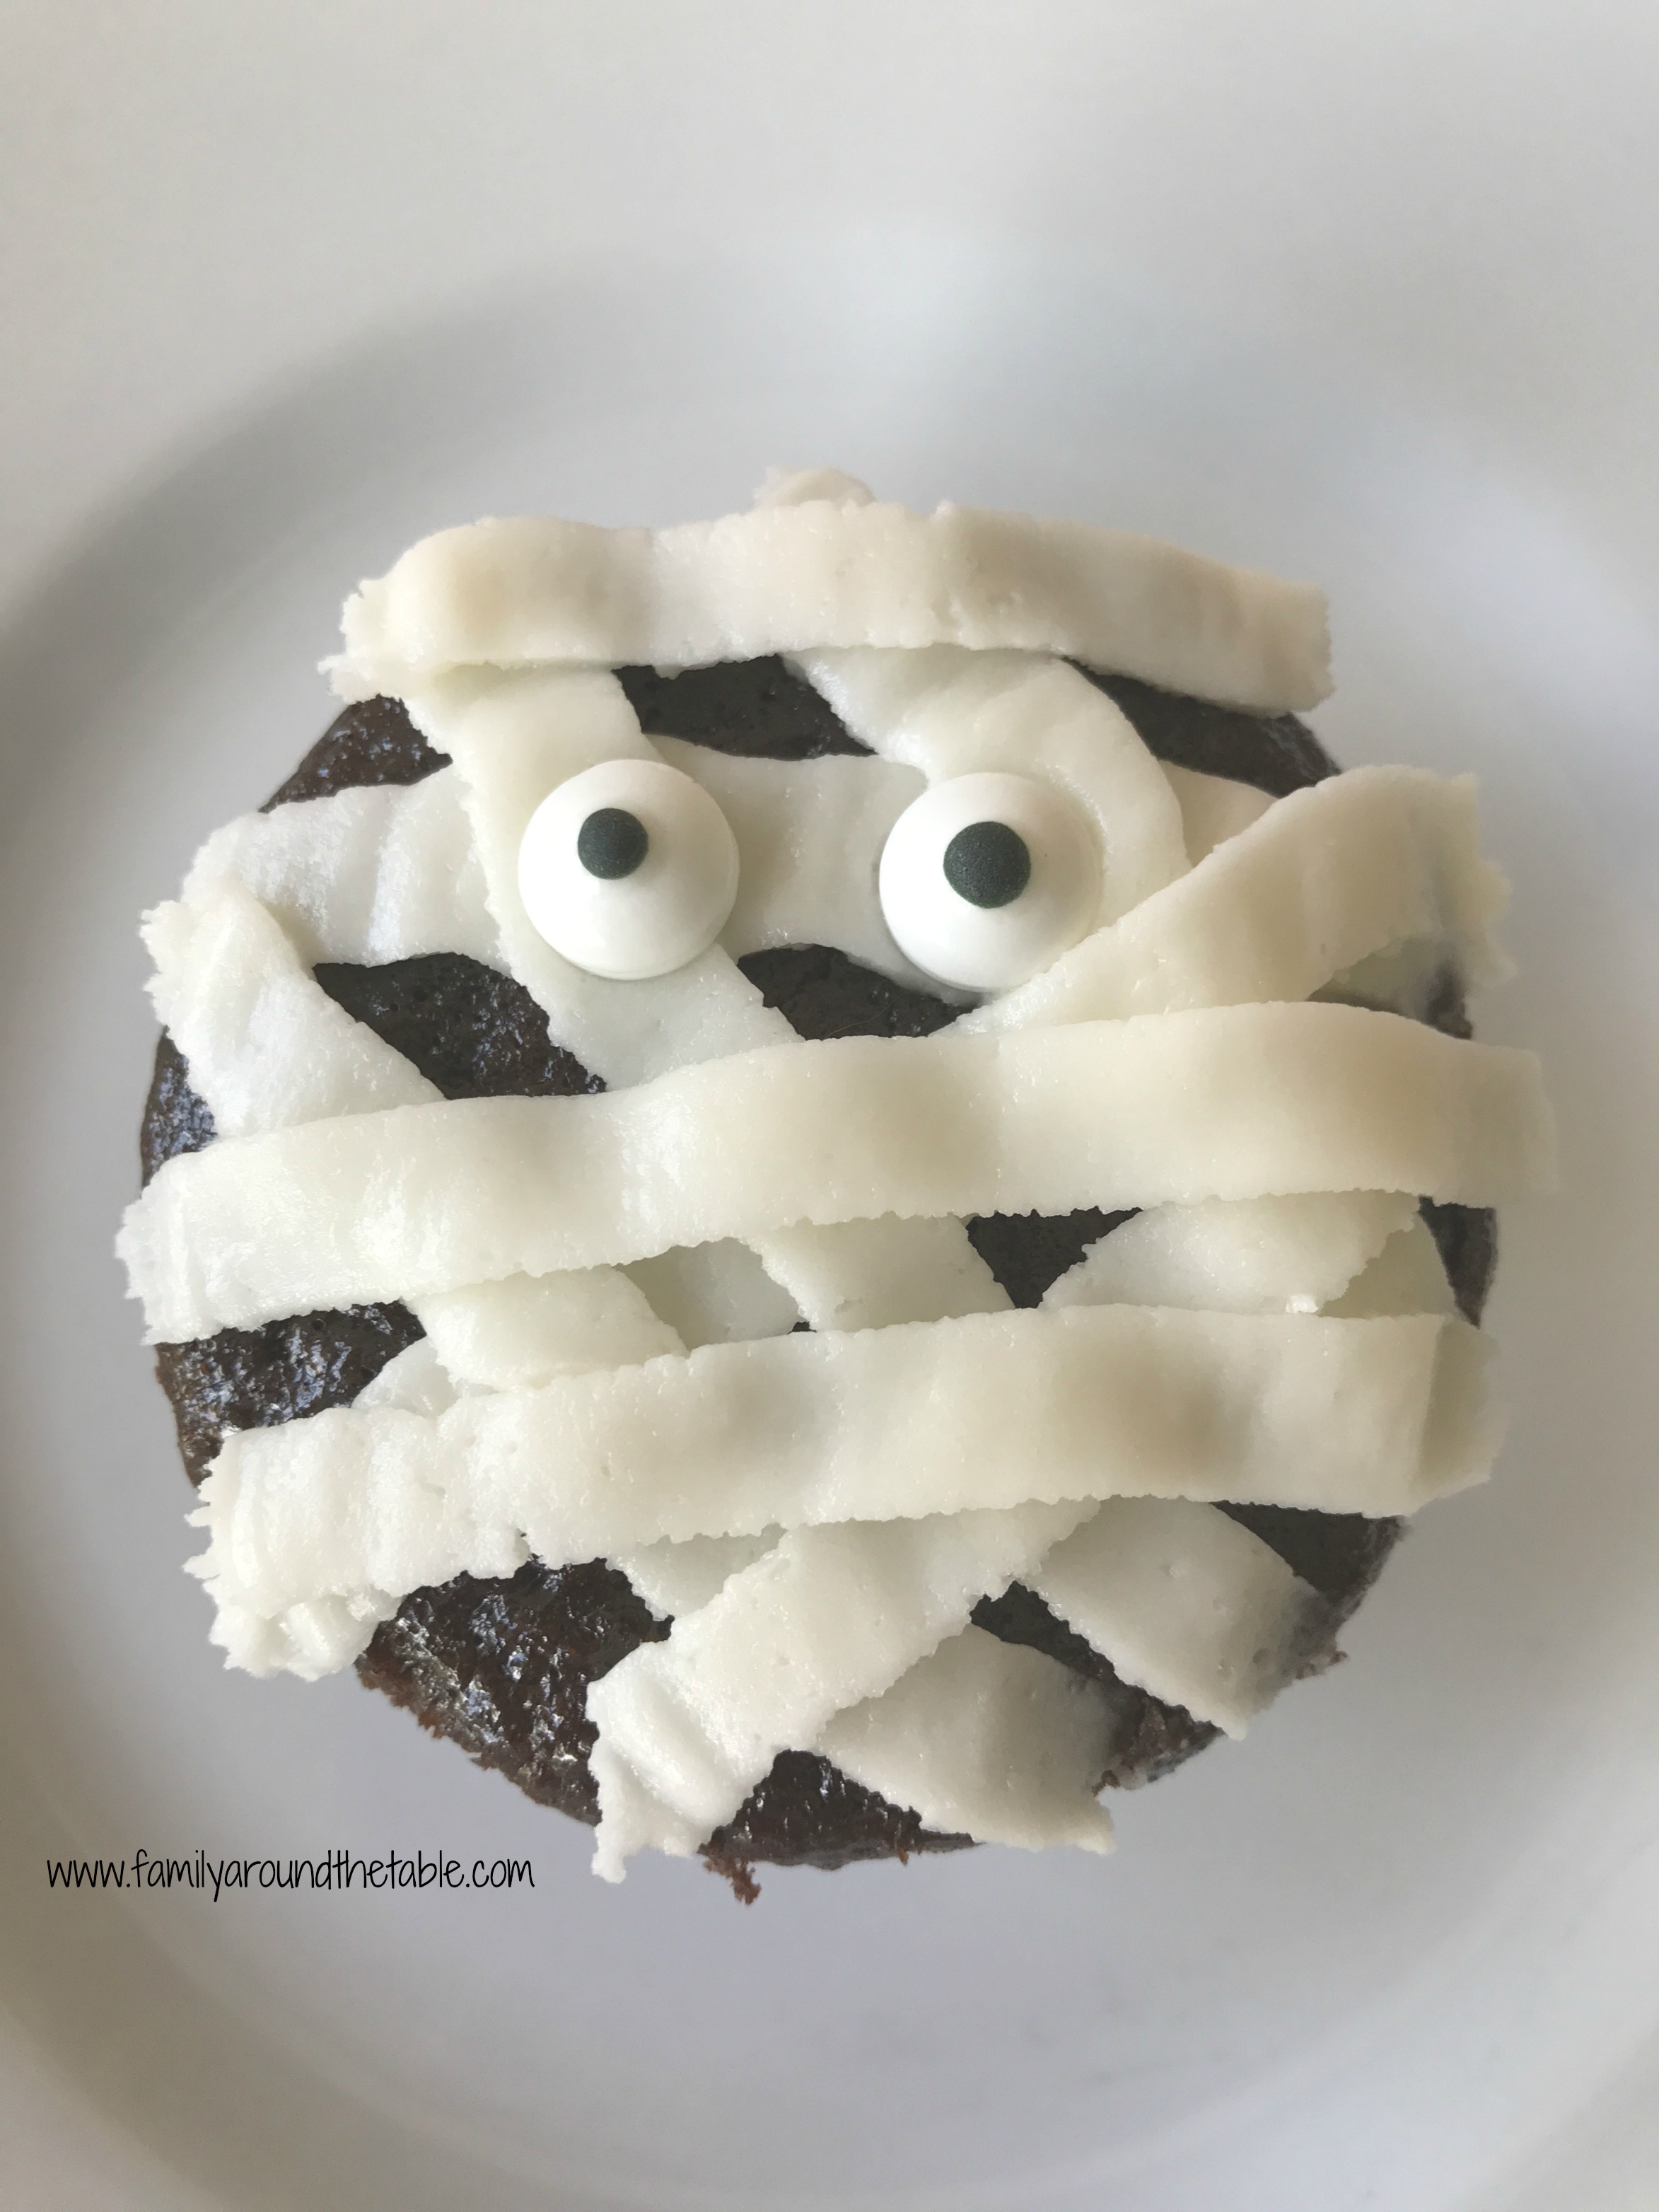 Mummy cupcakes are scary good!